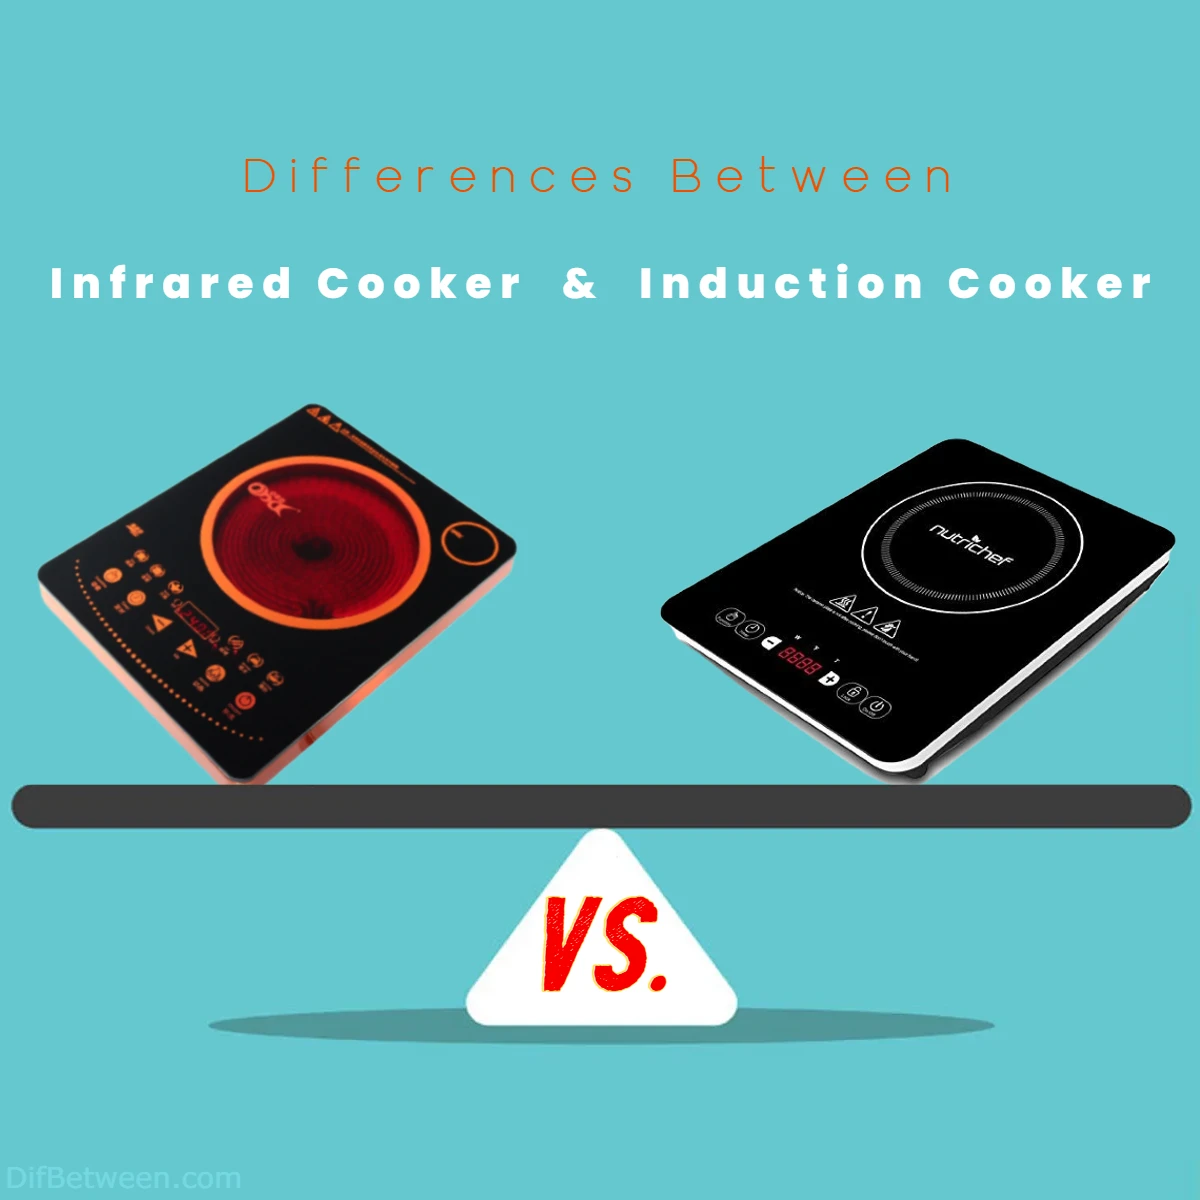 Differences Between Infrared Cooker vs Induction Cooker